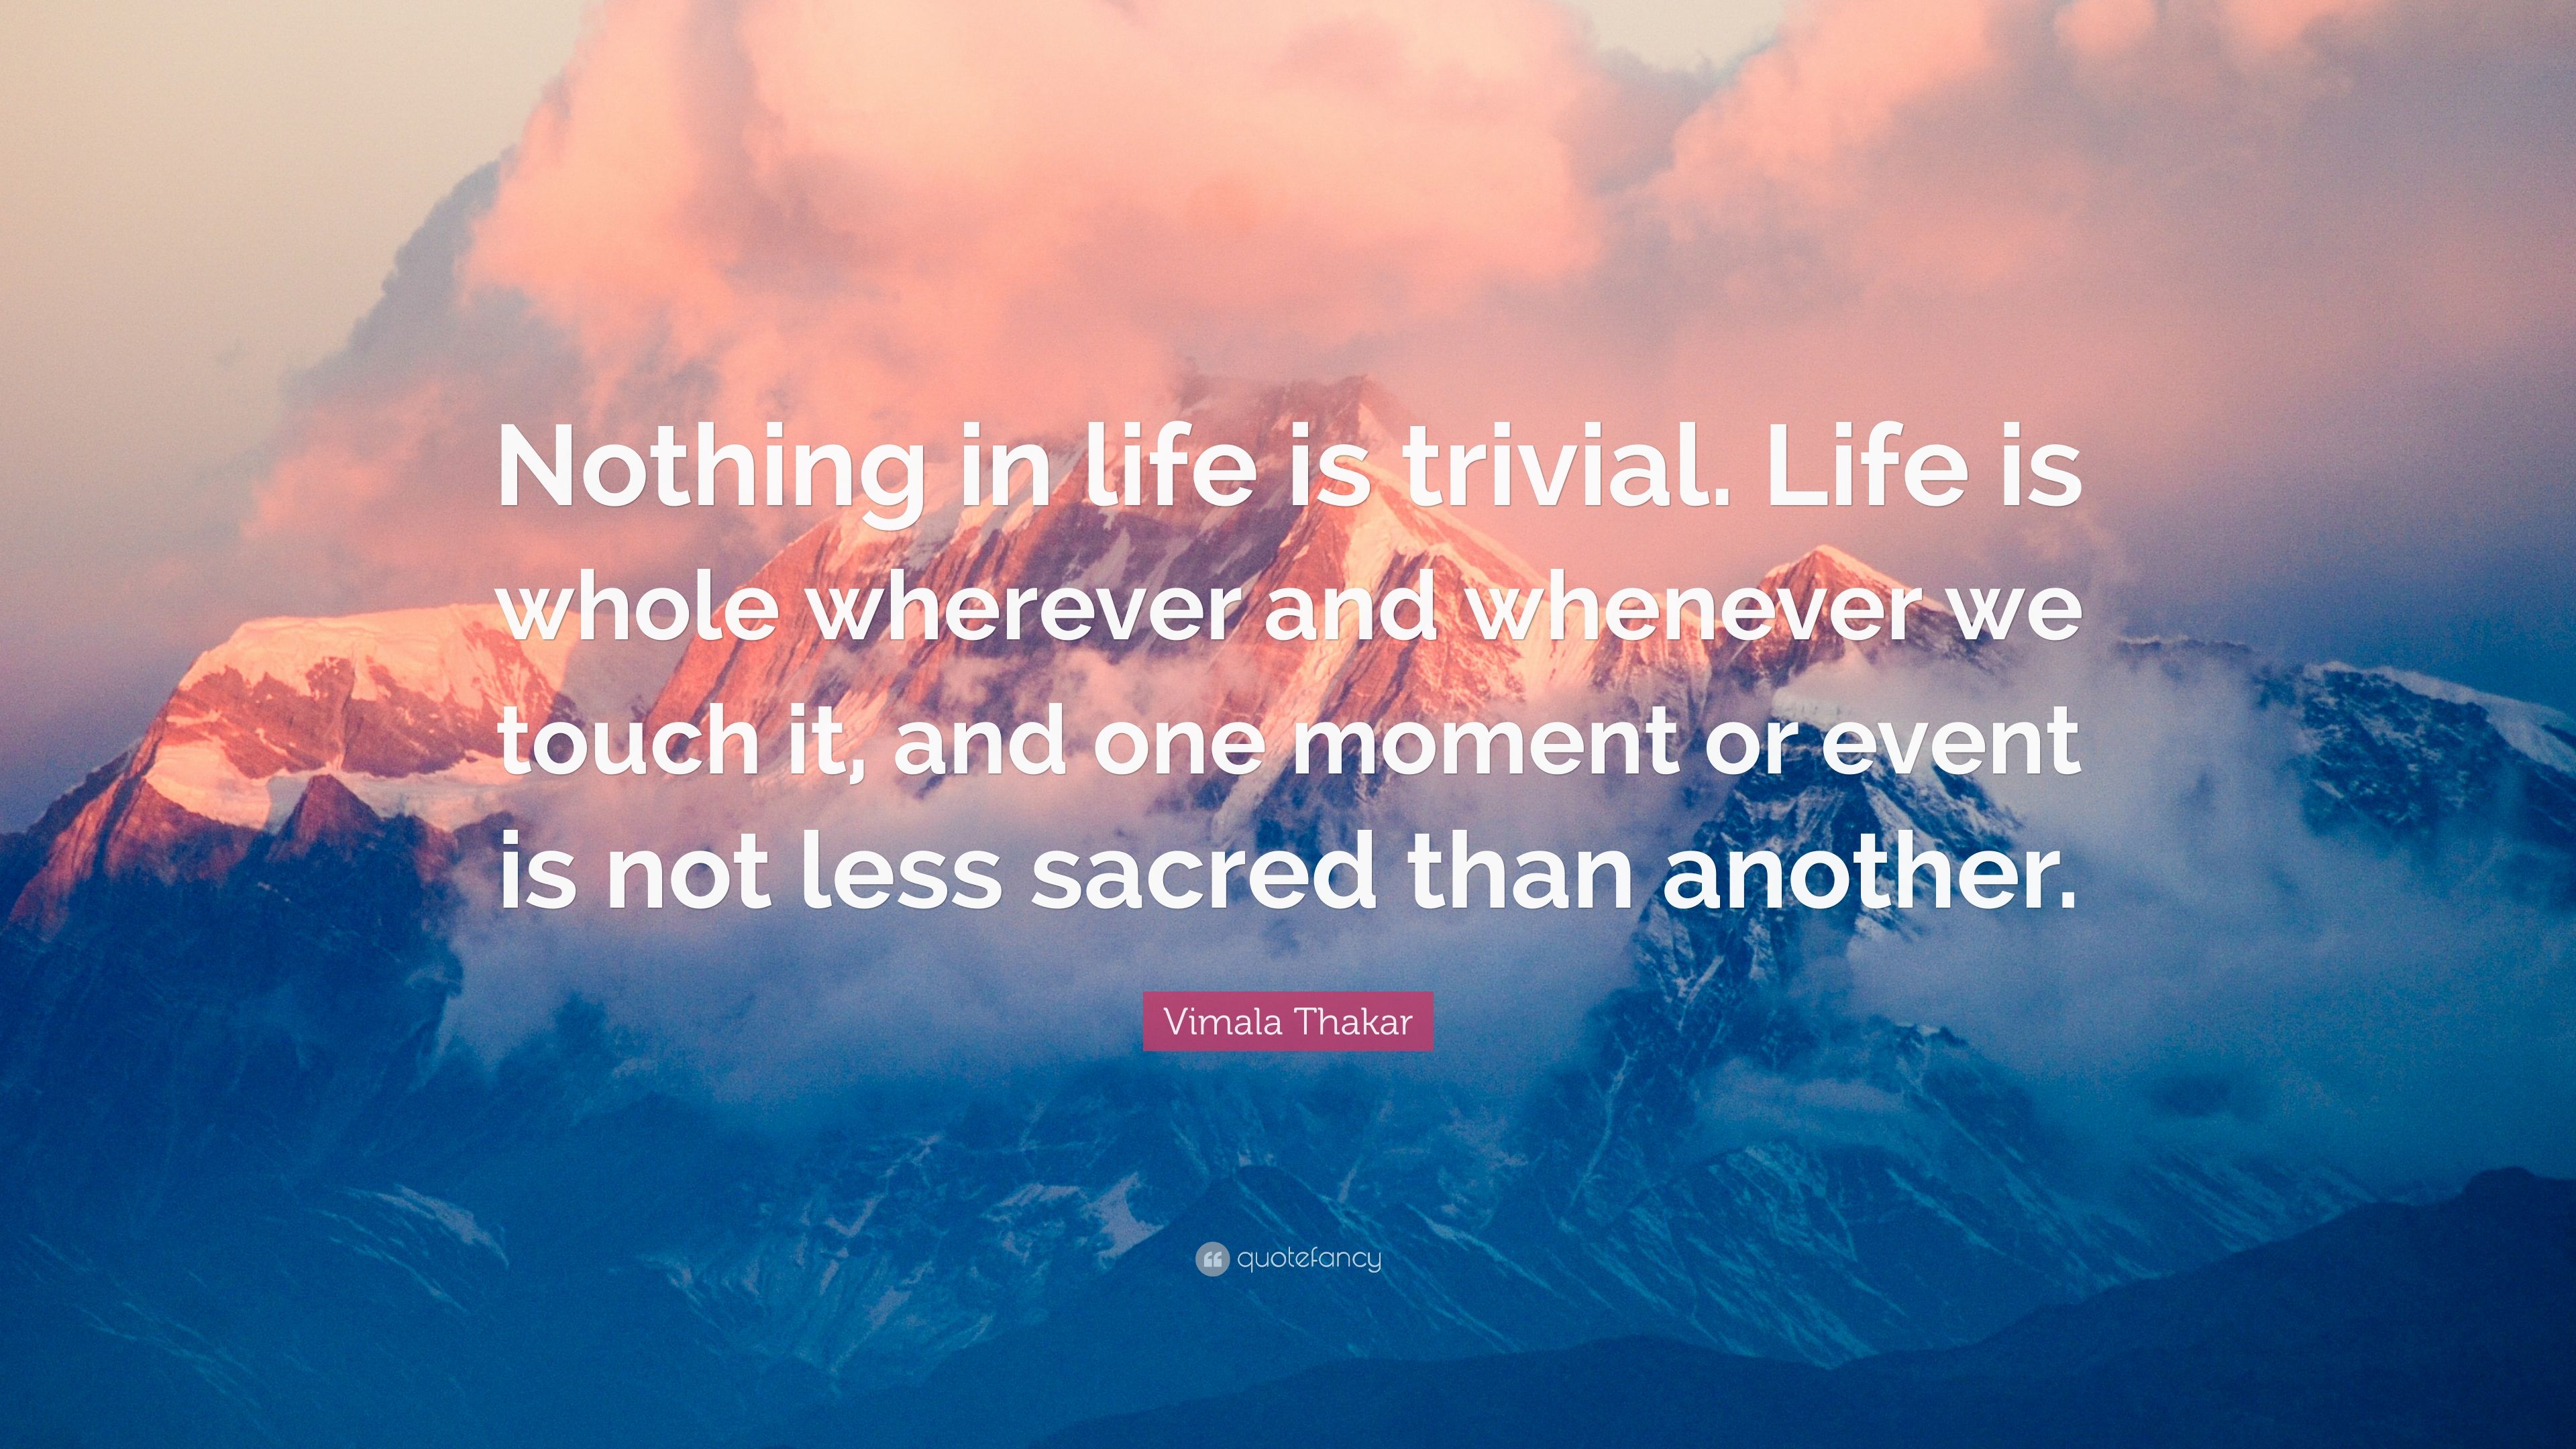 Vimala Thakar Quote: “Nothing in life is trivial. Life is whole ...